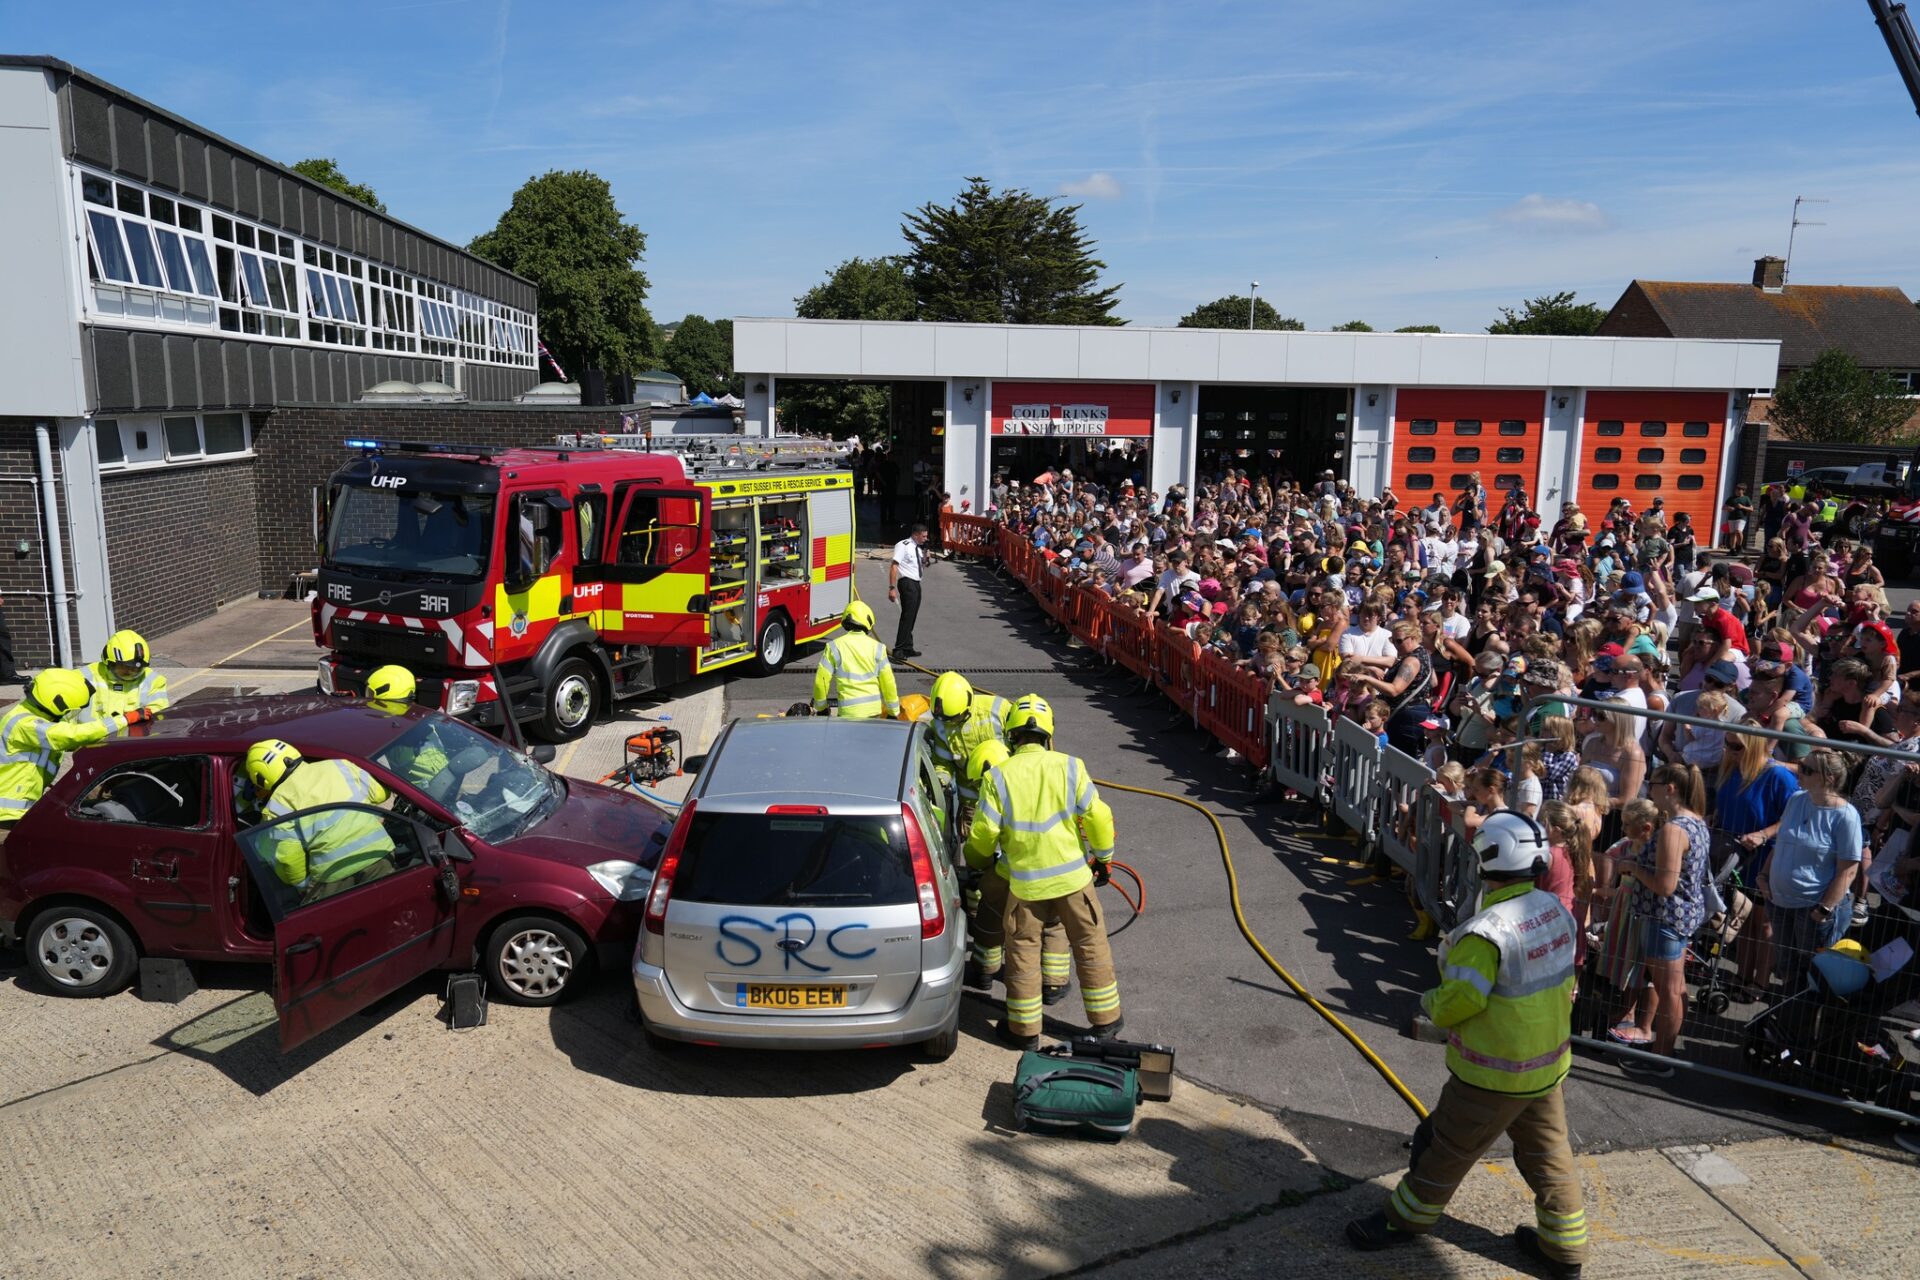 Worthing Fire Station Open Day and Broadwater Carnival